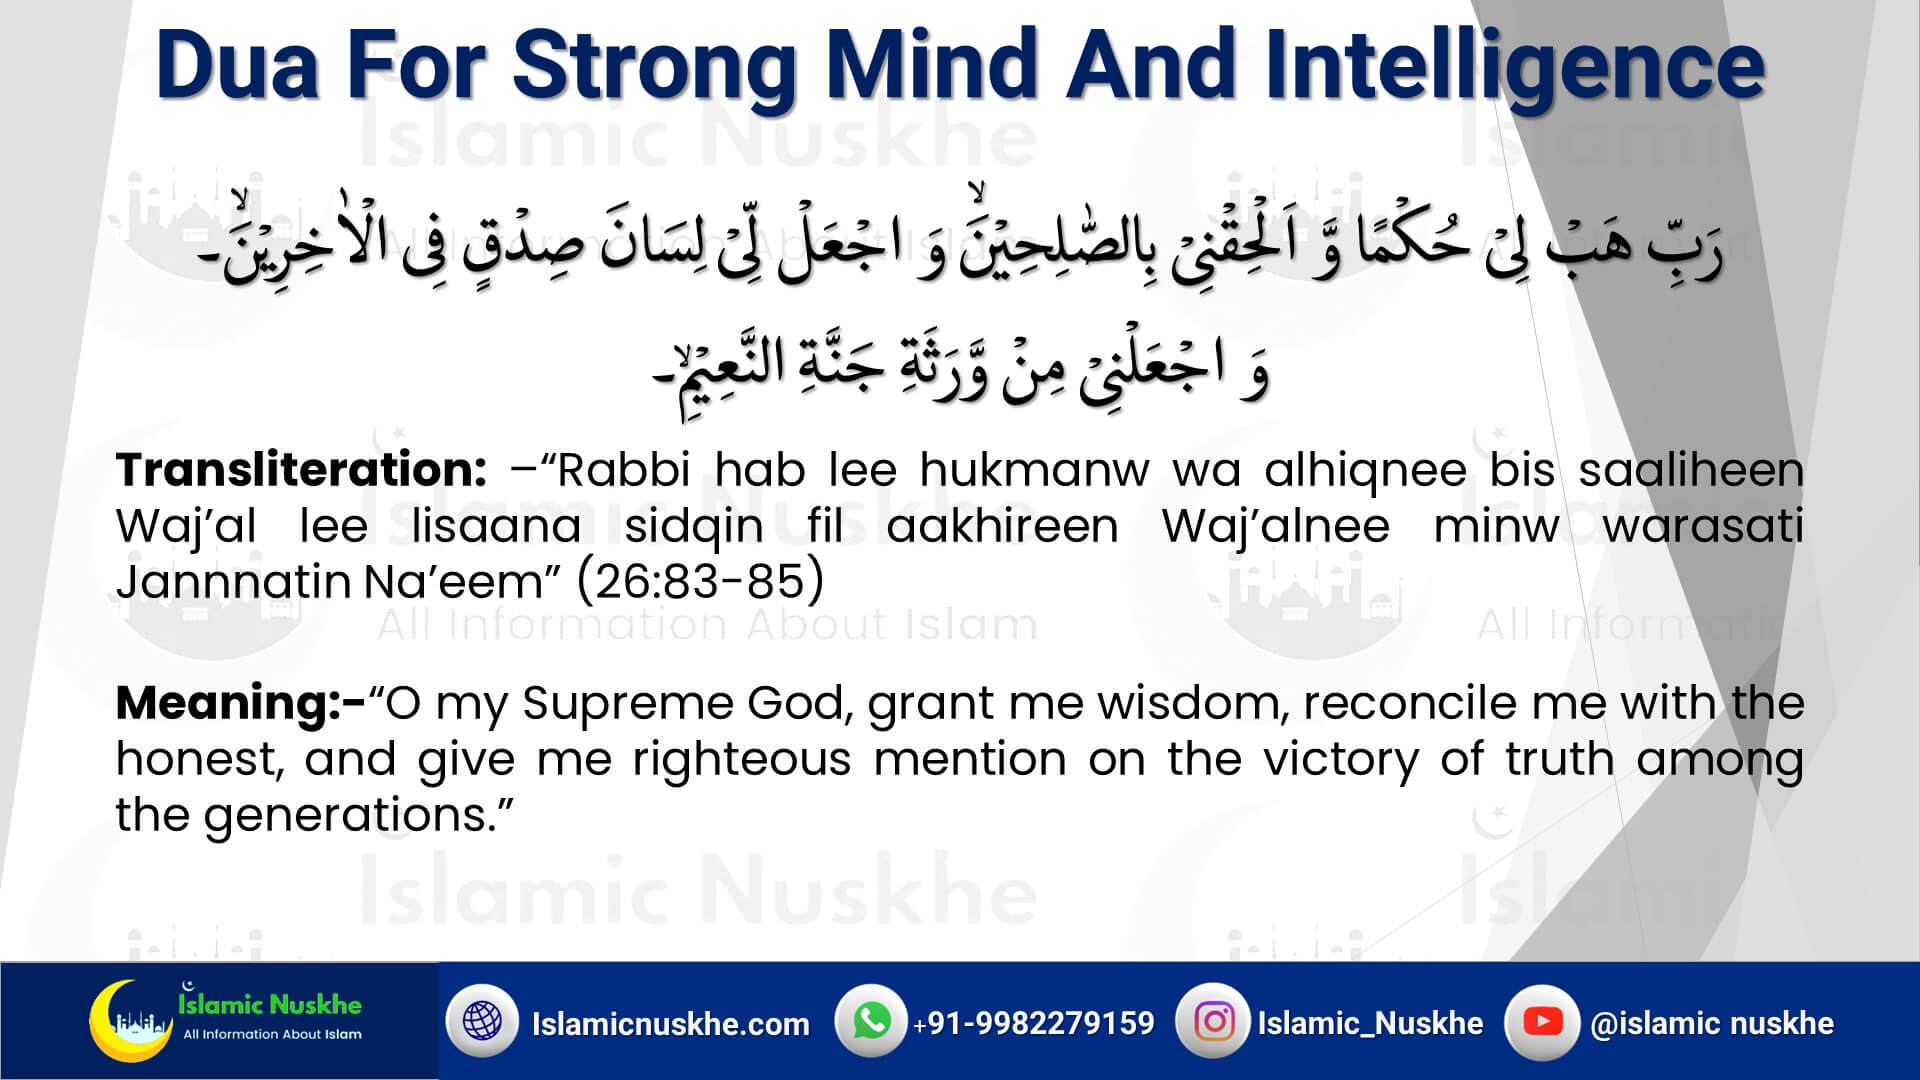 Dua For Strong Mind And Intelligence